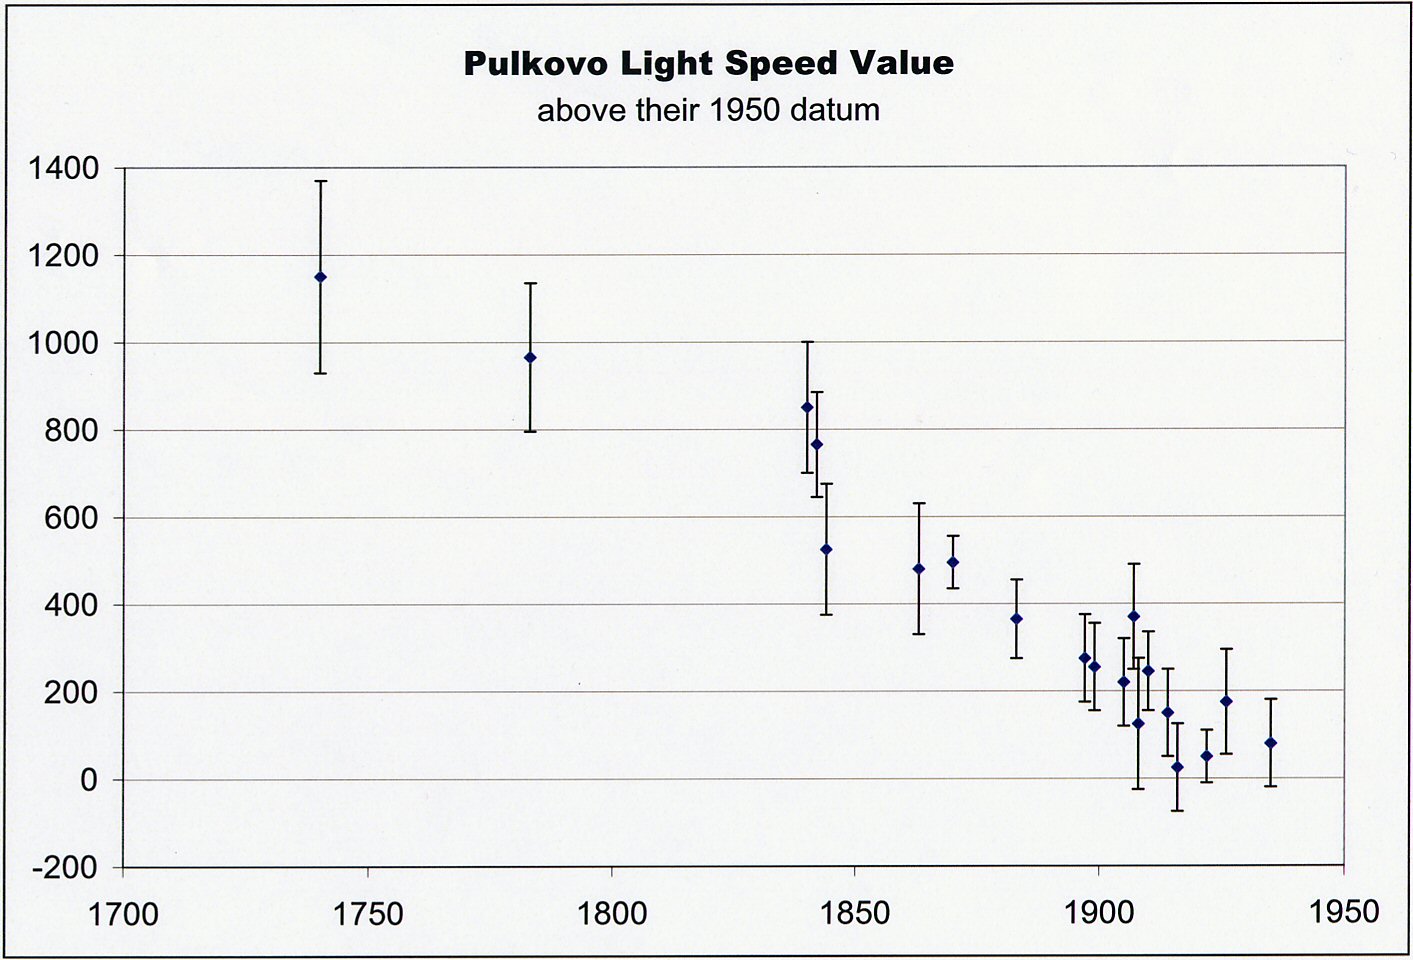 Pulkovo values of light speed (vertical axis) expressed as the deviation from the 1935 value.